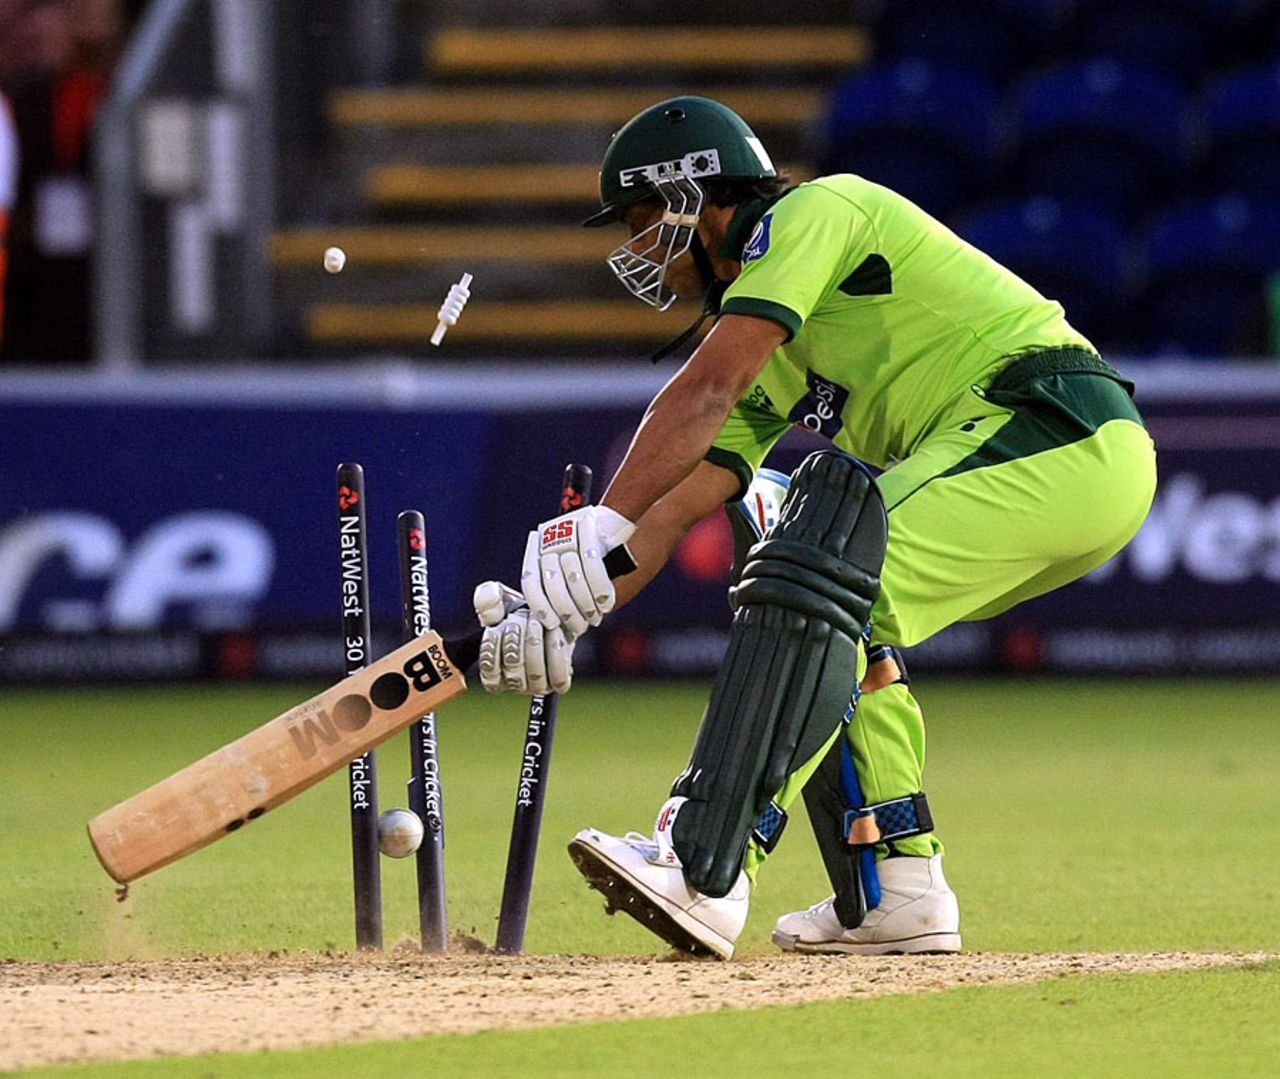 The innings ended with Shoaib Akhtar being bowled by Tim Bresnan, England v Pakistan, 2nd T20I, Cardiff, September 7, 2010